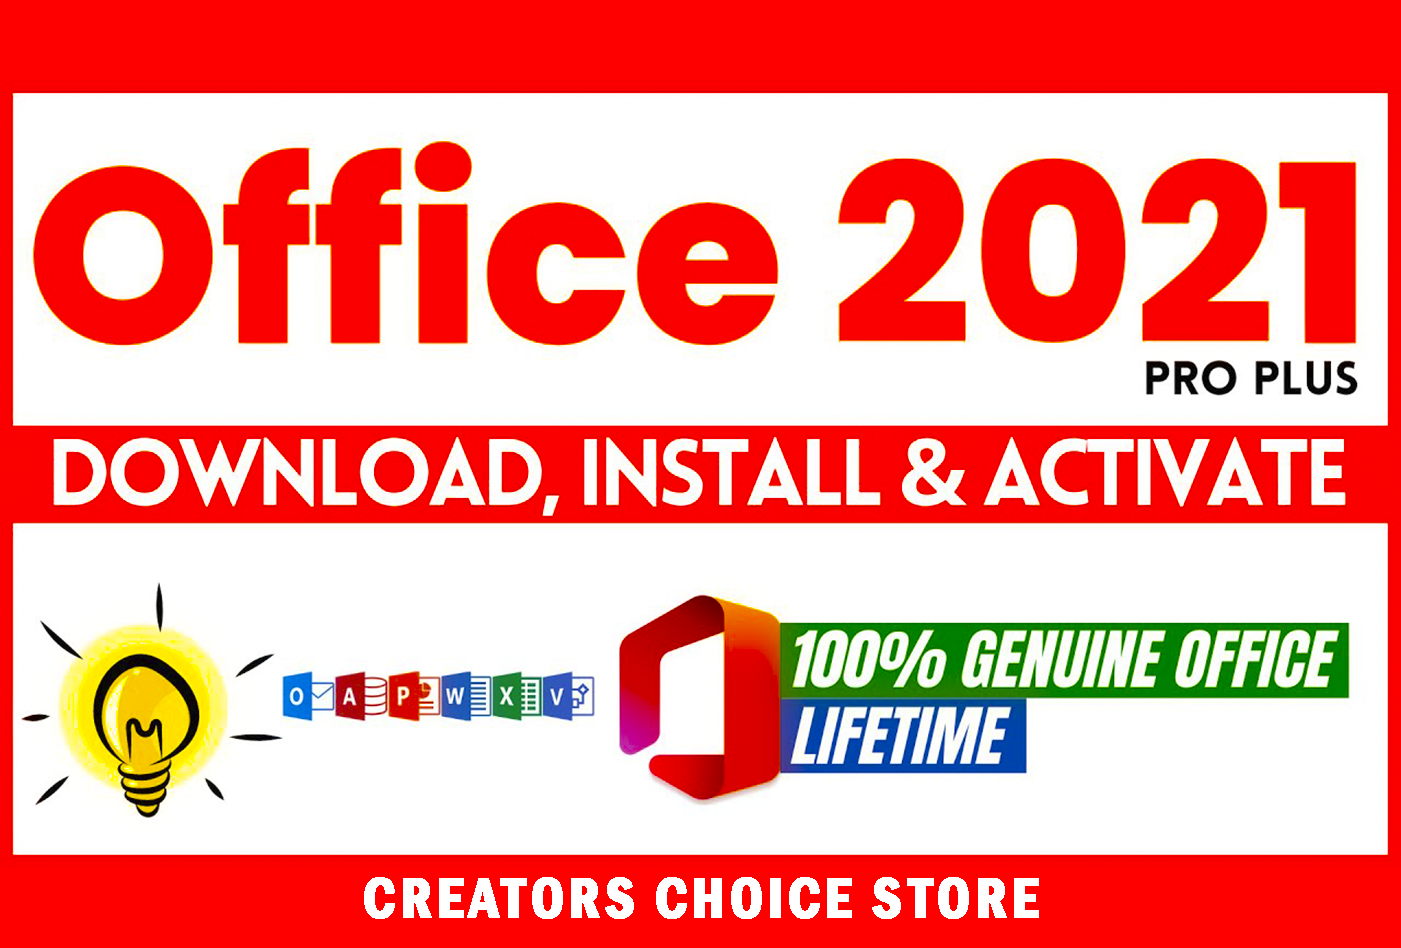 Microsoft Office Professional Plus 2021 Fully Activated